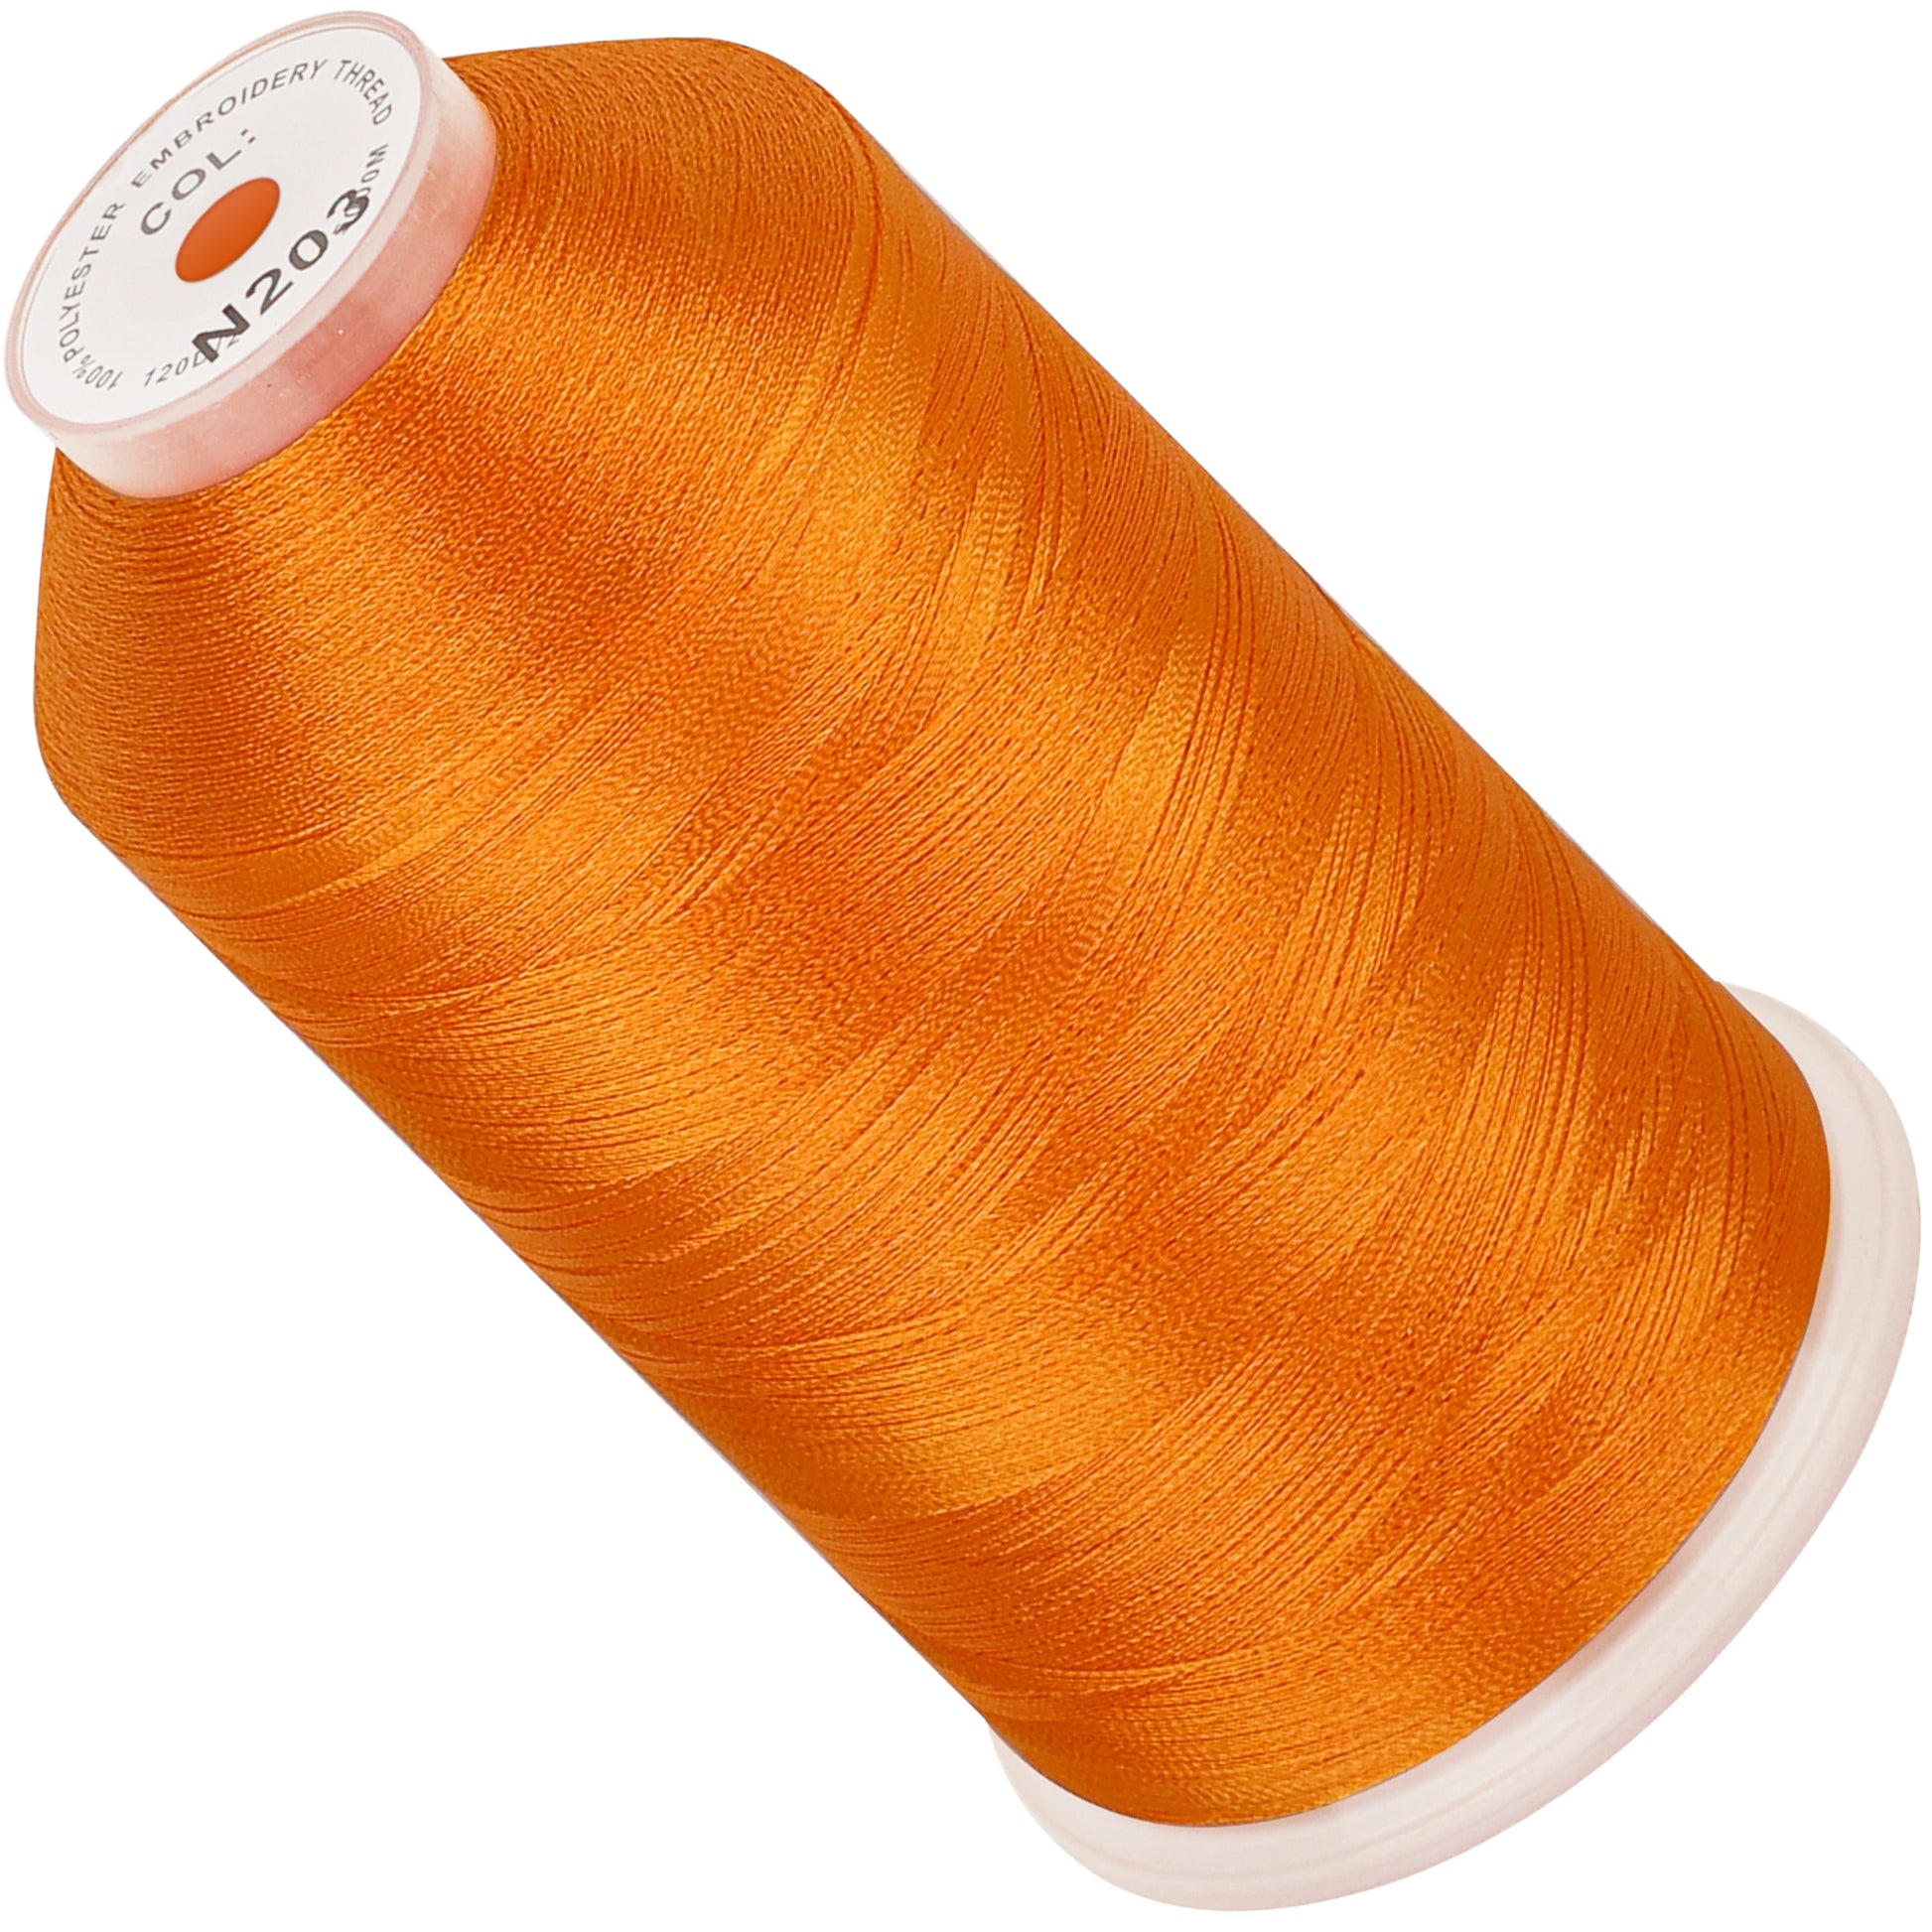 New brothread - Single Huge Spool 5000M Each Polyester Embroidery